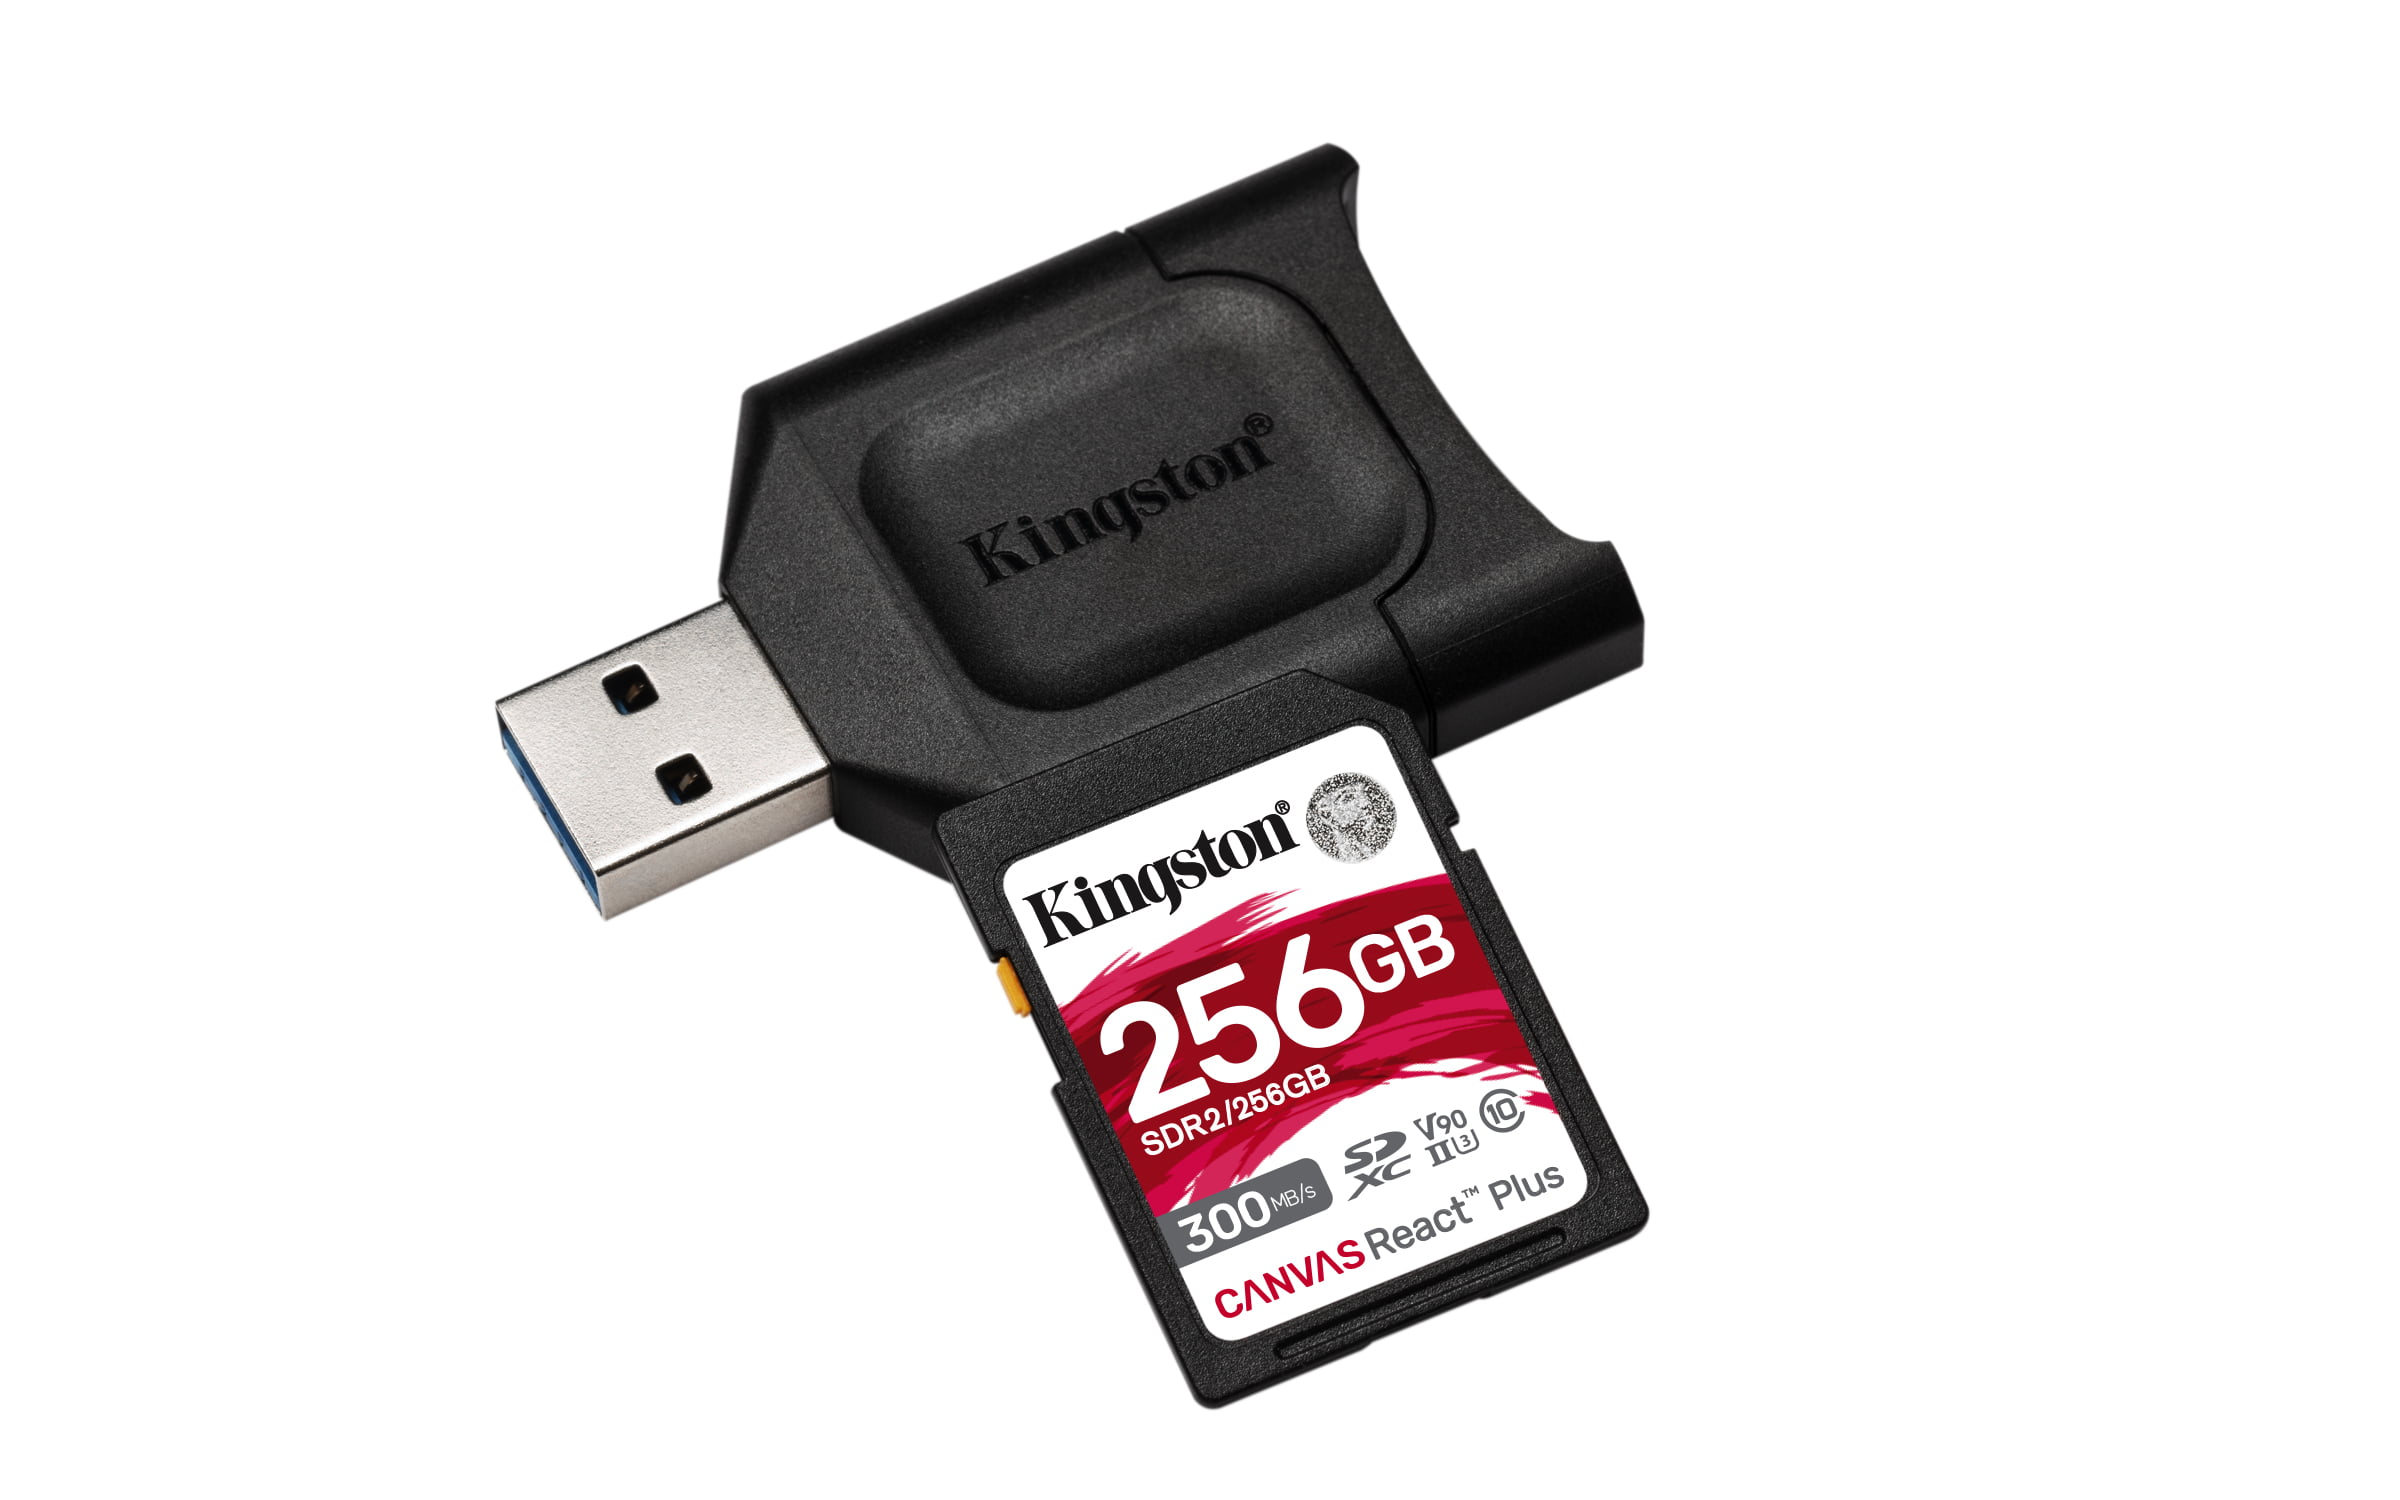 100MBs Works with Kingston Kingston 64GB Kyocera Hydro Shore MicroSDXC Canvas Select Plus Card Verified by SanFlash. 